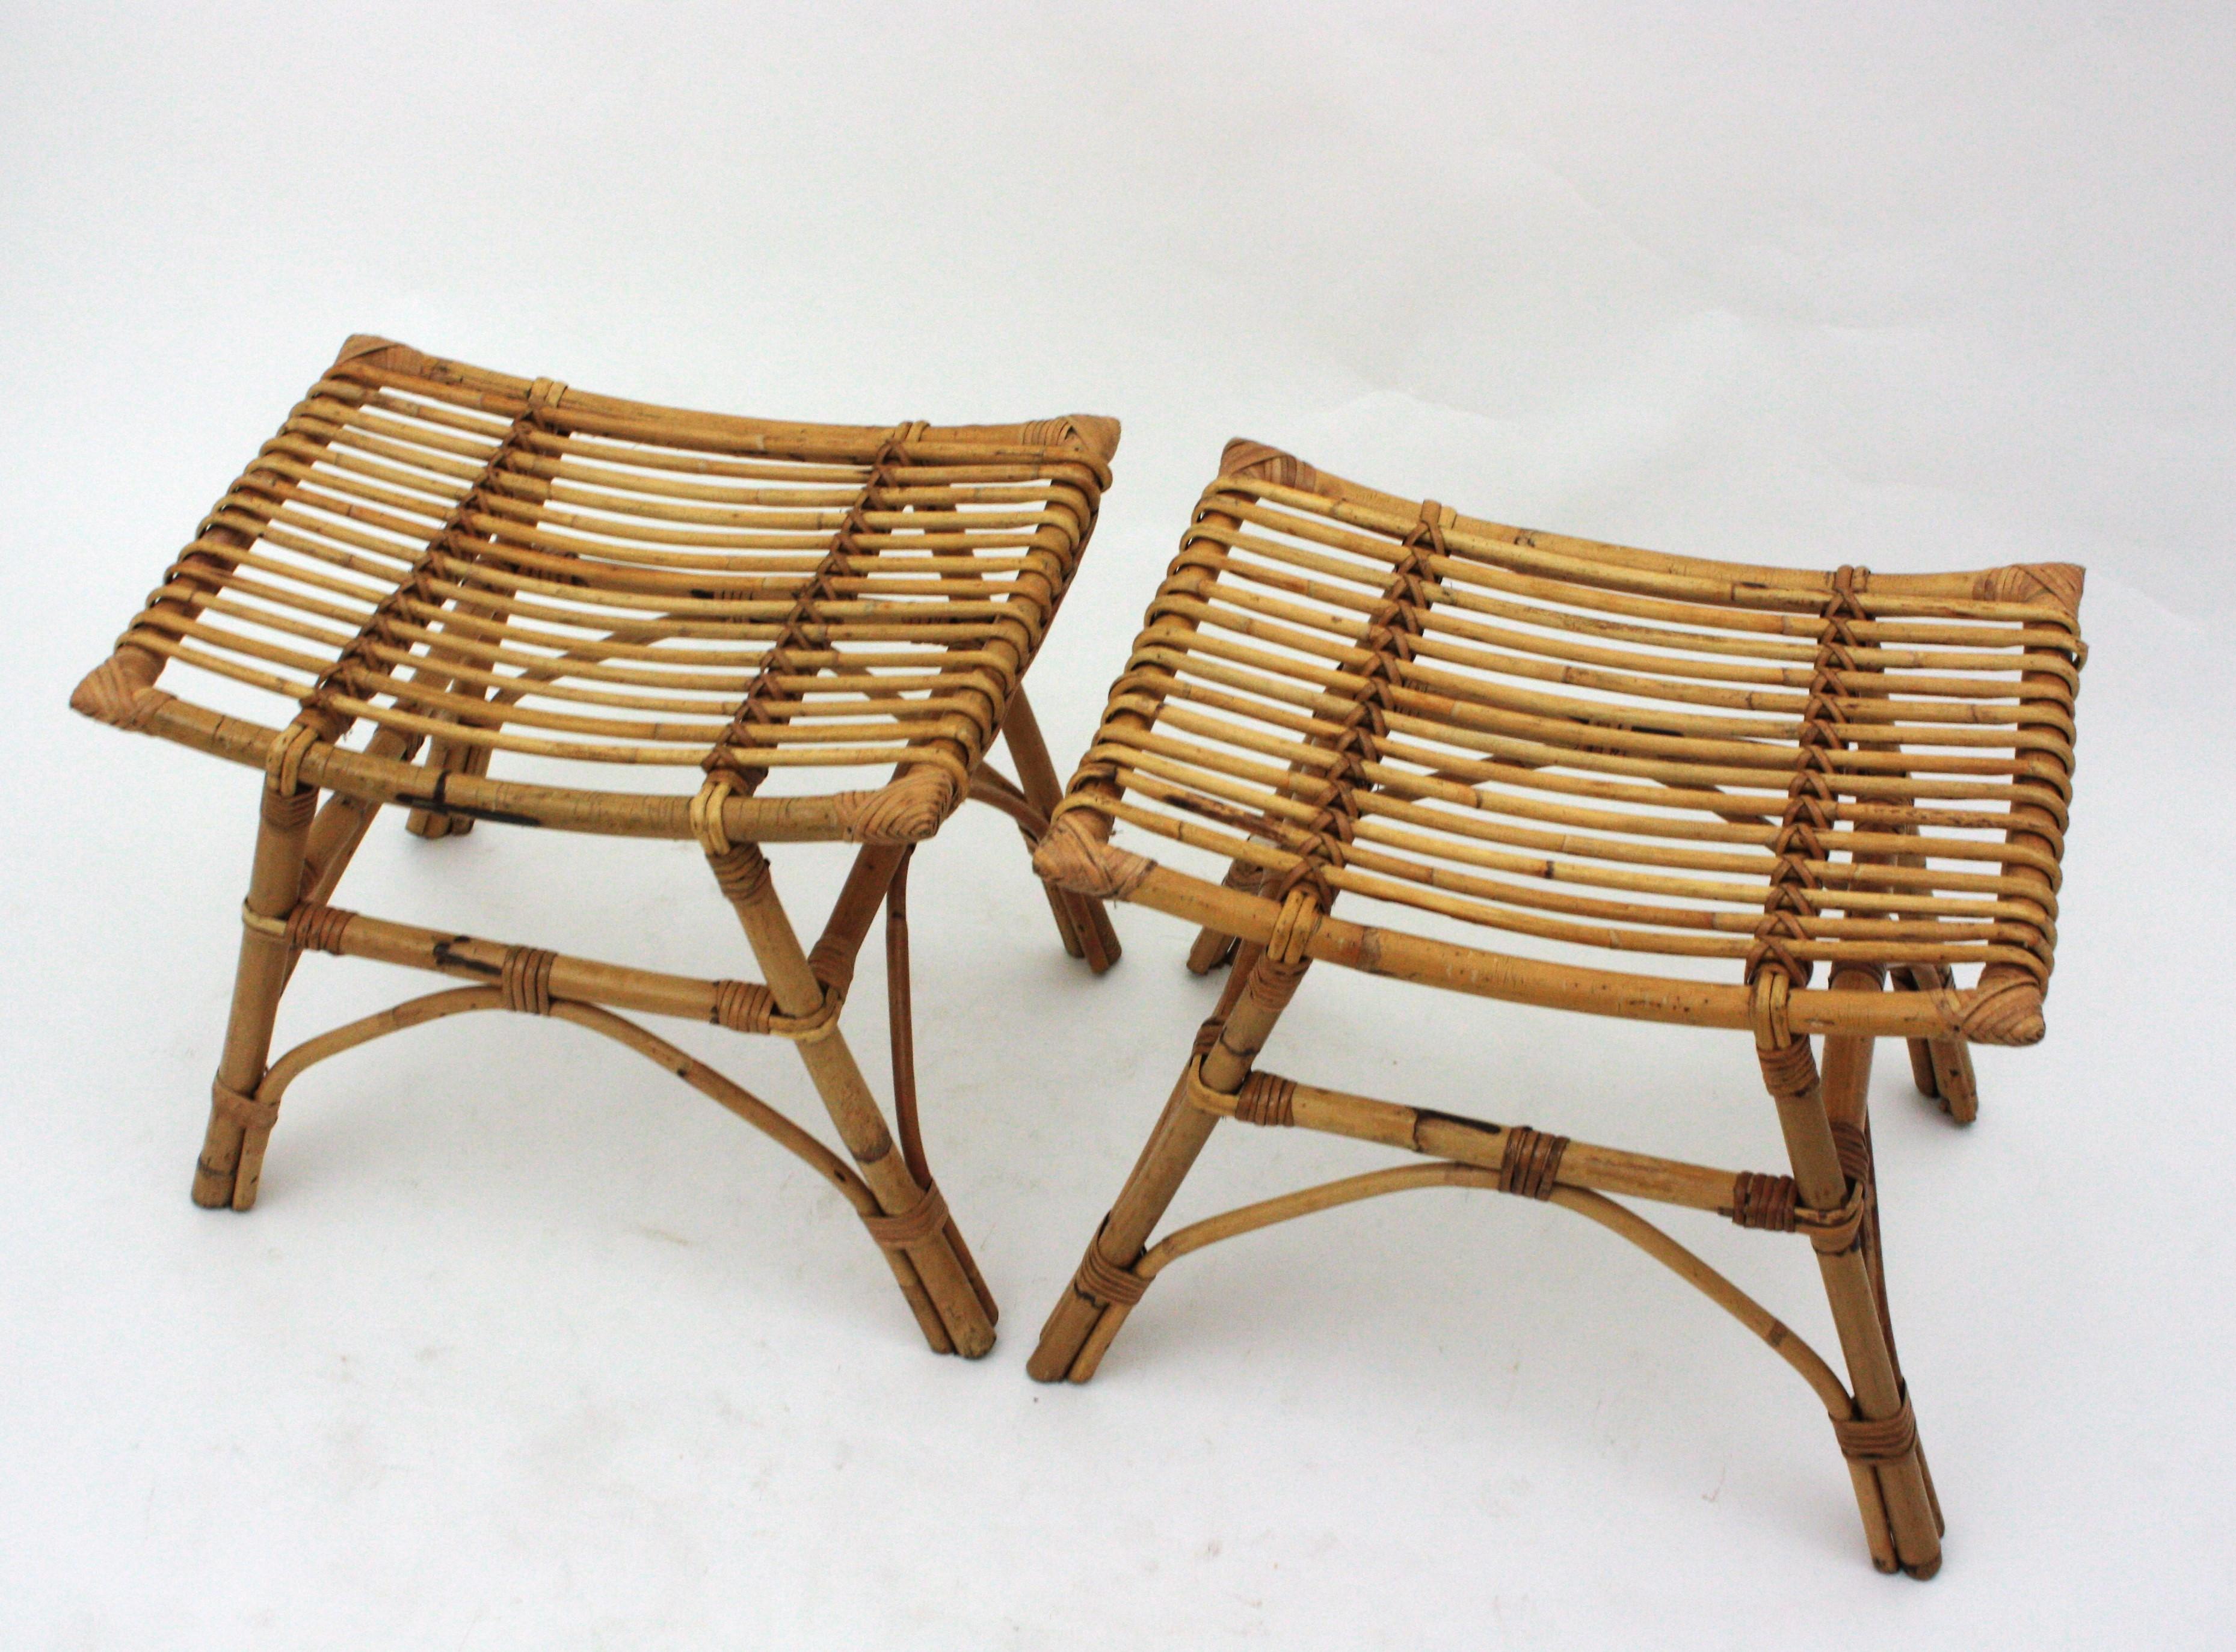 Pair of Bamboo Rattan Stools or Side Tables, 1960s For Sale 4